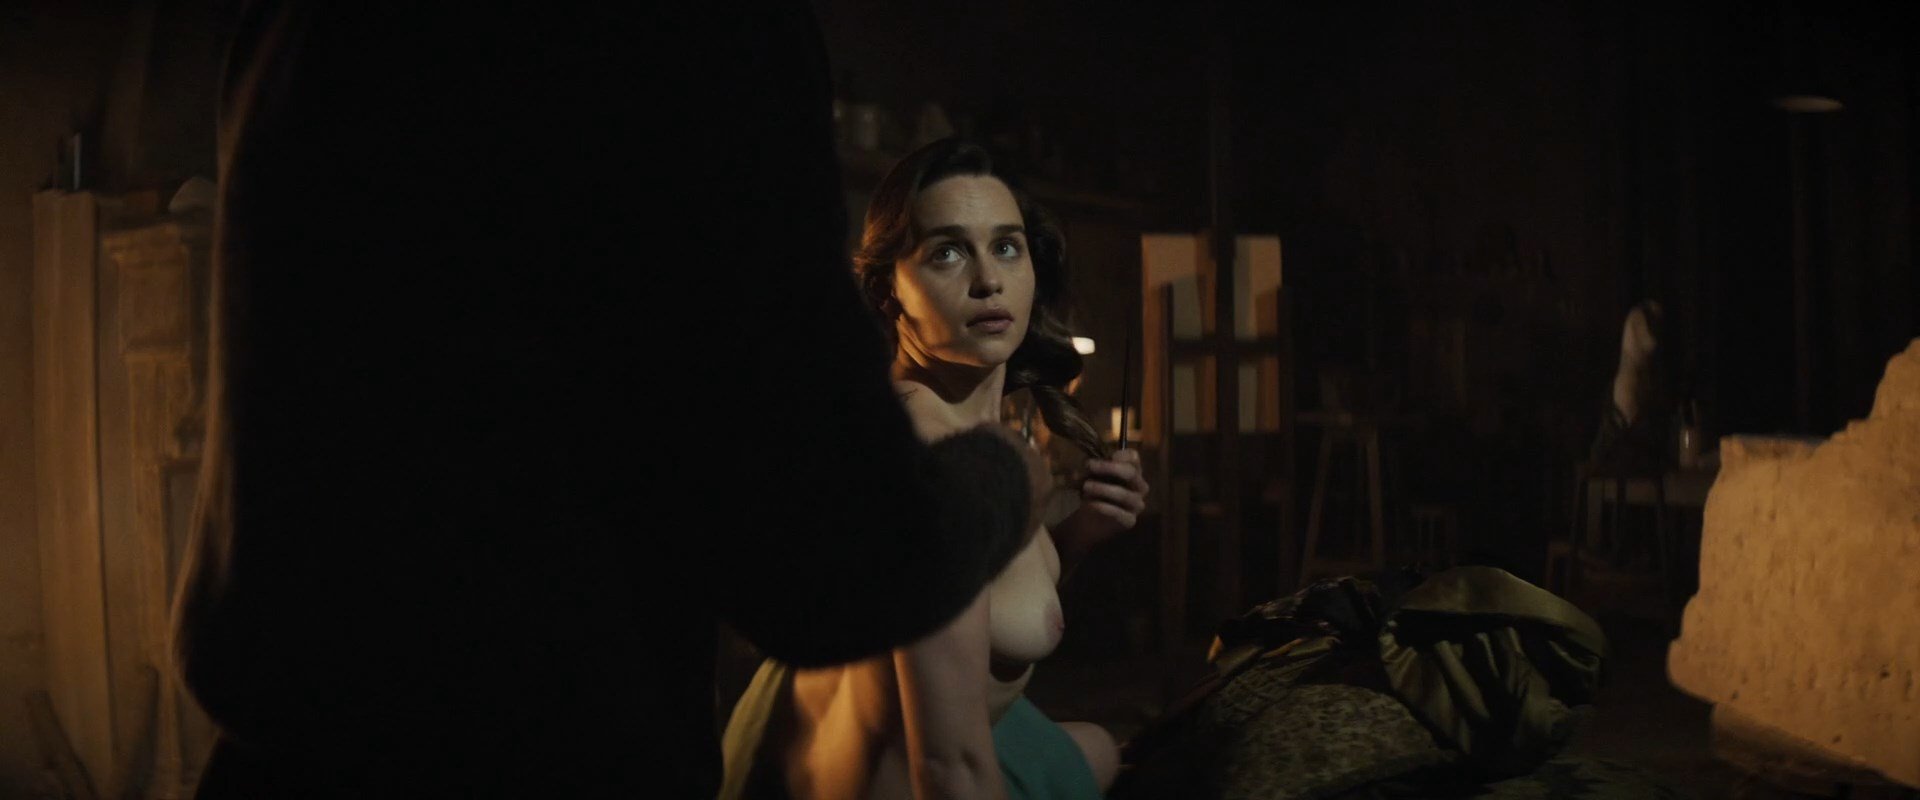 Emilia Clarke Nude - Voice from the Stone (2017) 1080p